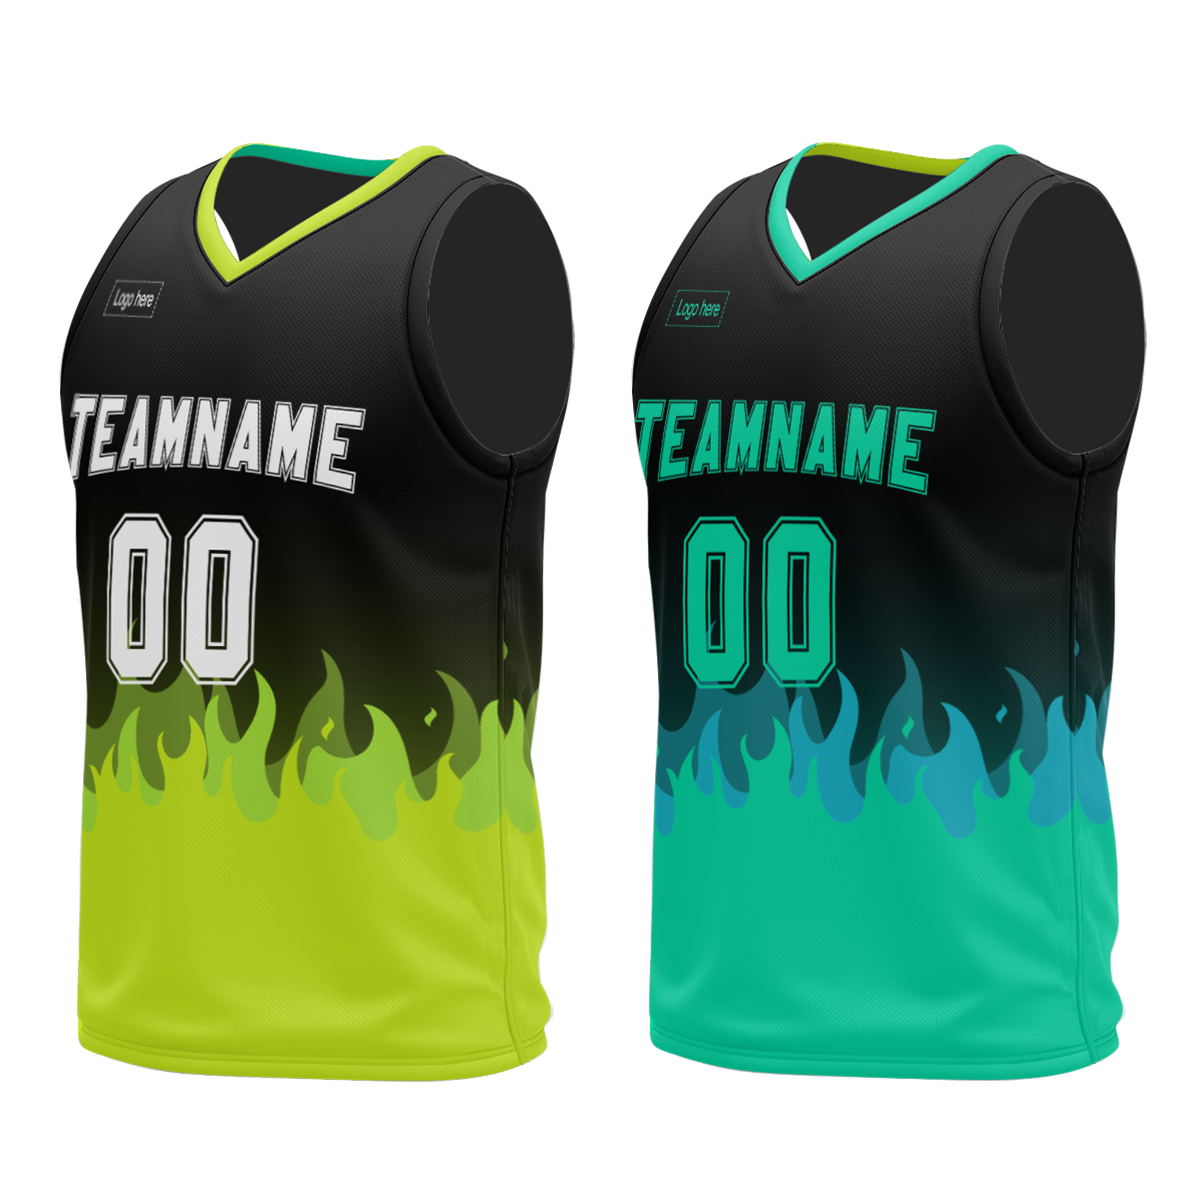 wholesale-custom-basketball-jerseys-sublimation-printed-reversible-mesh-performance-athletic-team-uniforms-for-sports-at-cj-pod-5